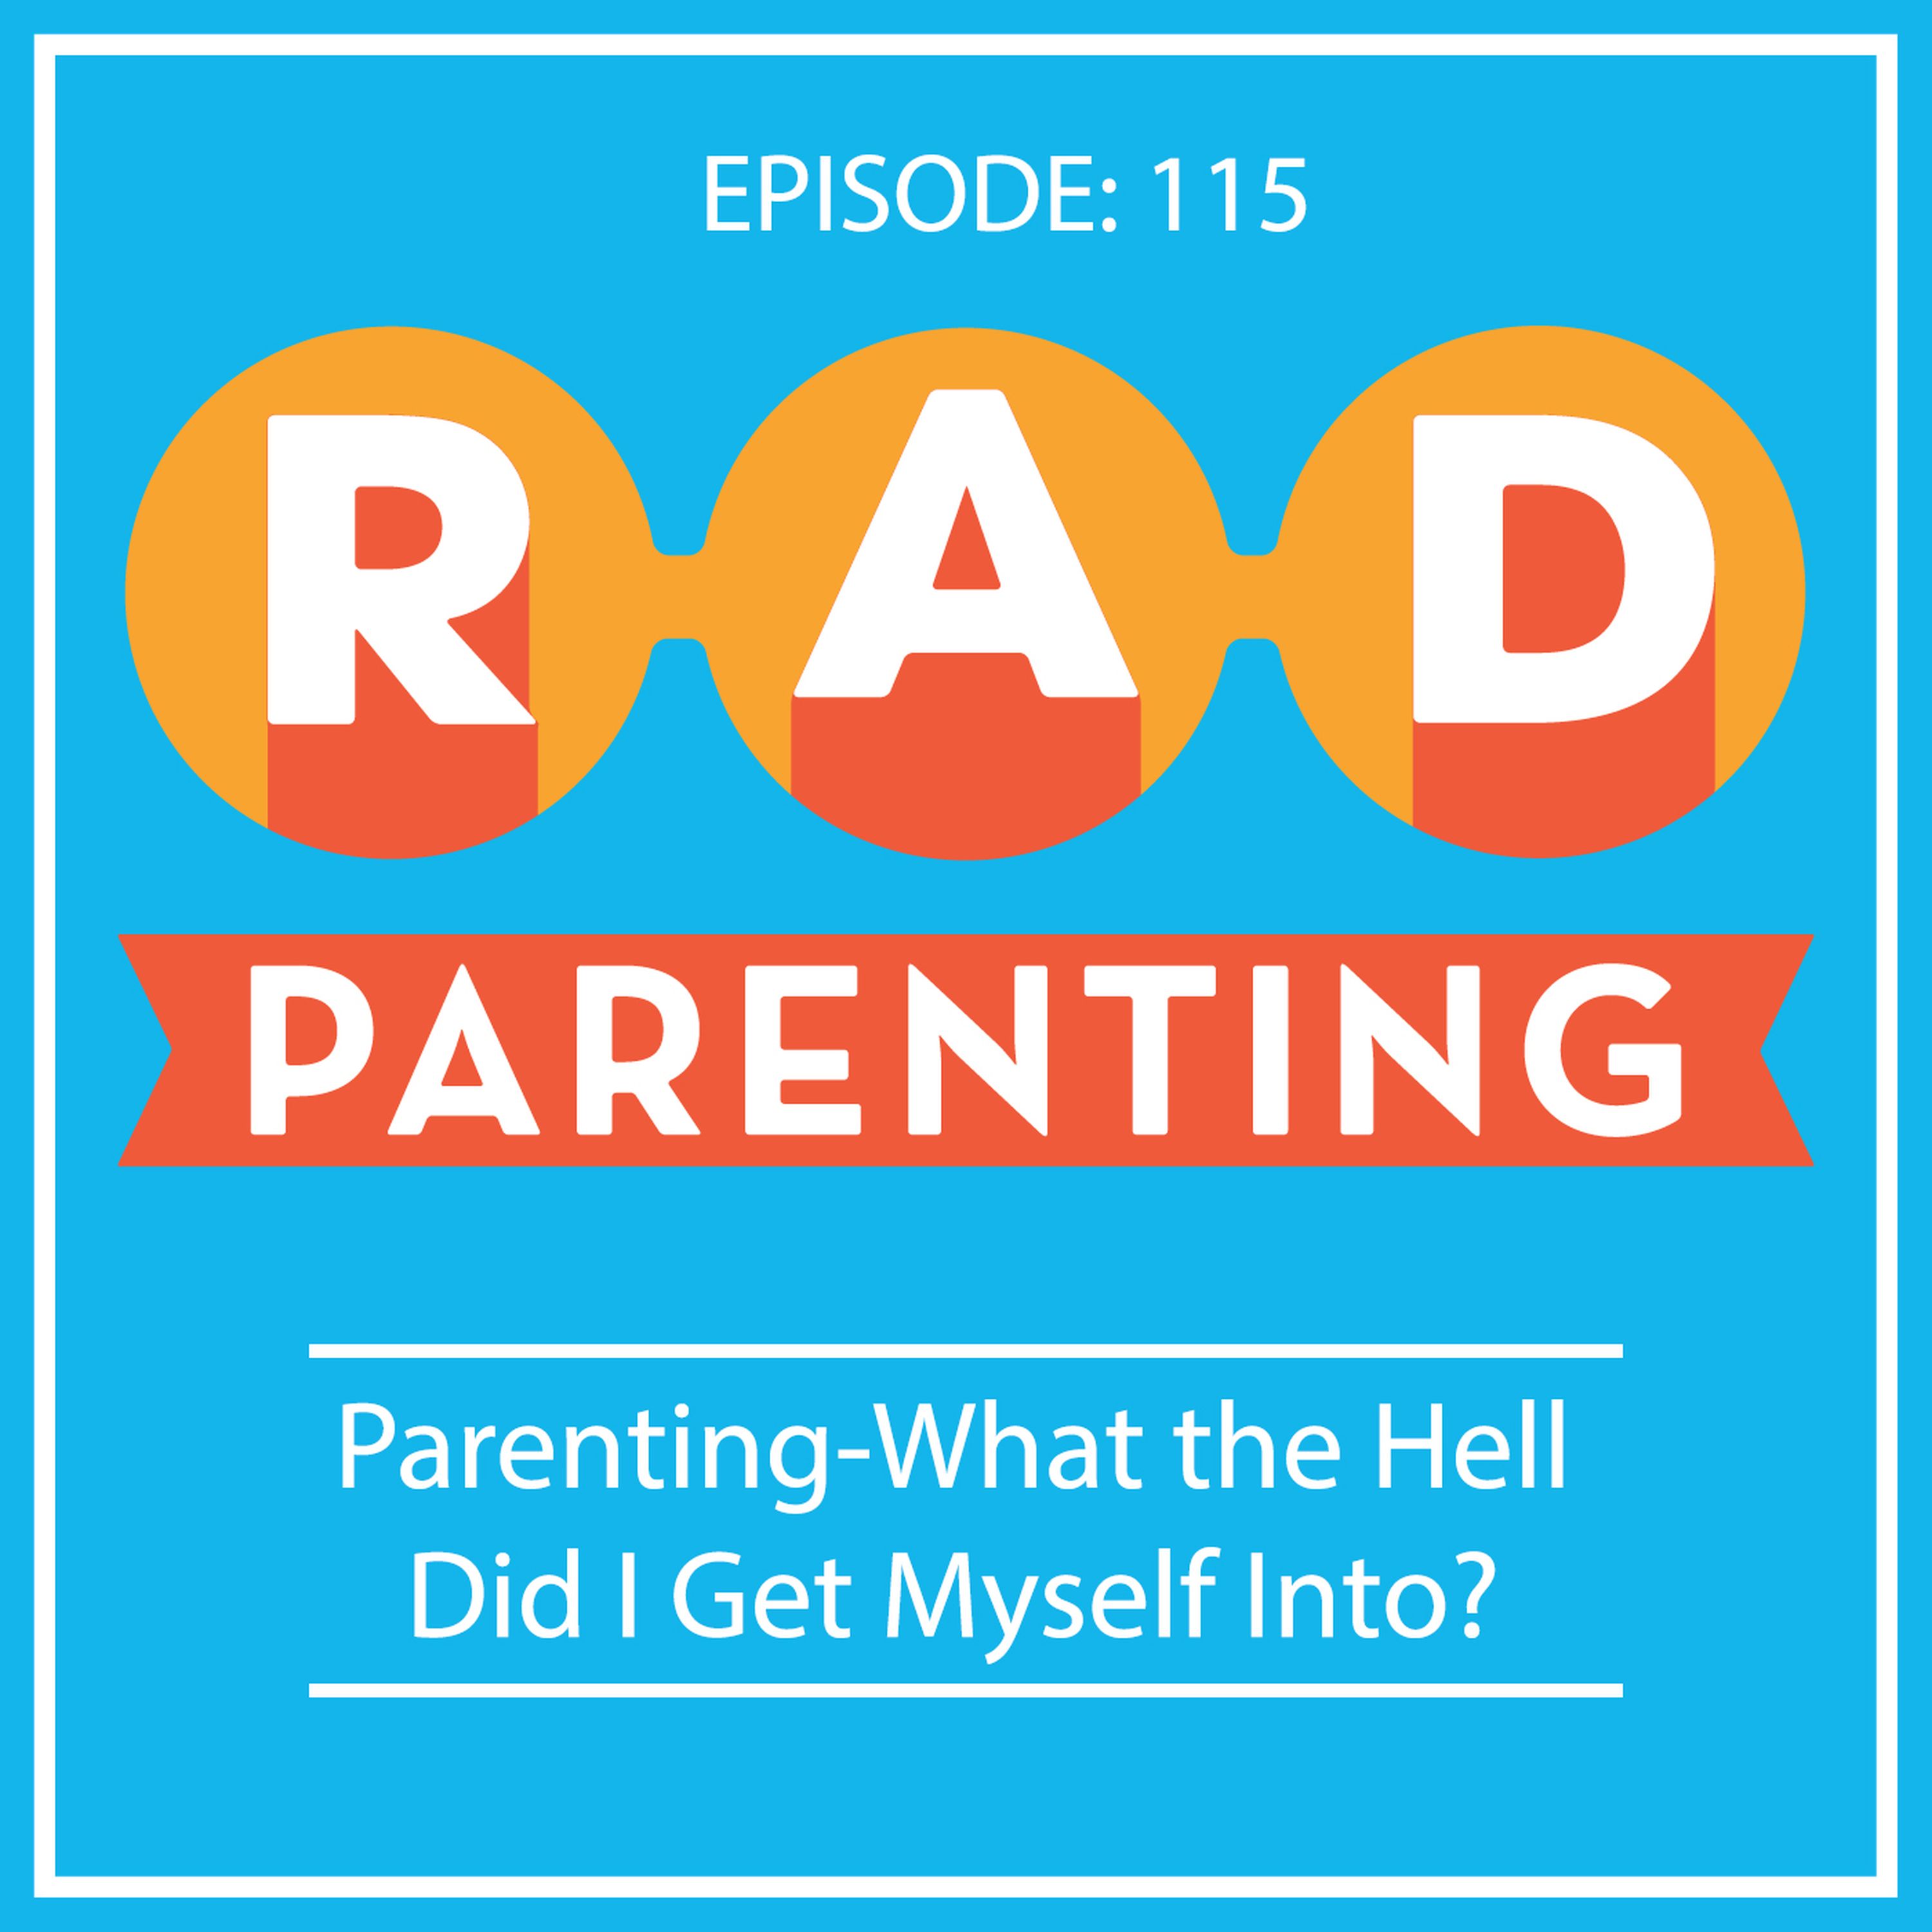 Parenting-What the Hell Did I Get Myself Into?